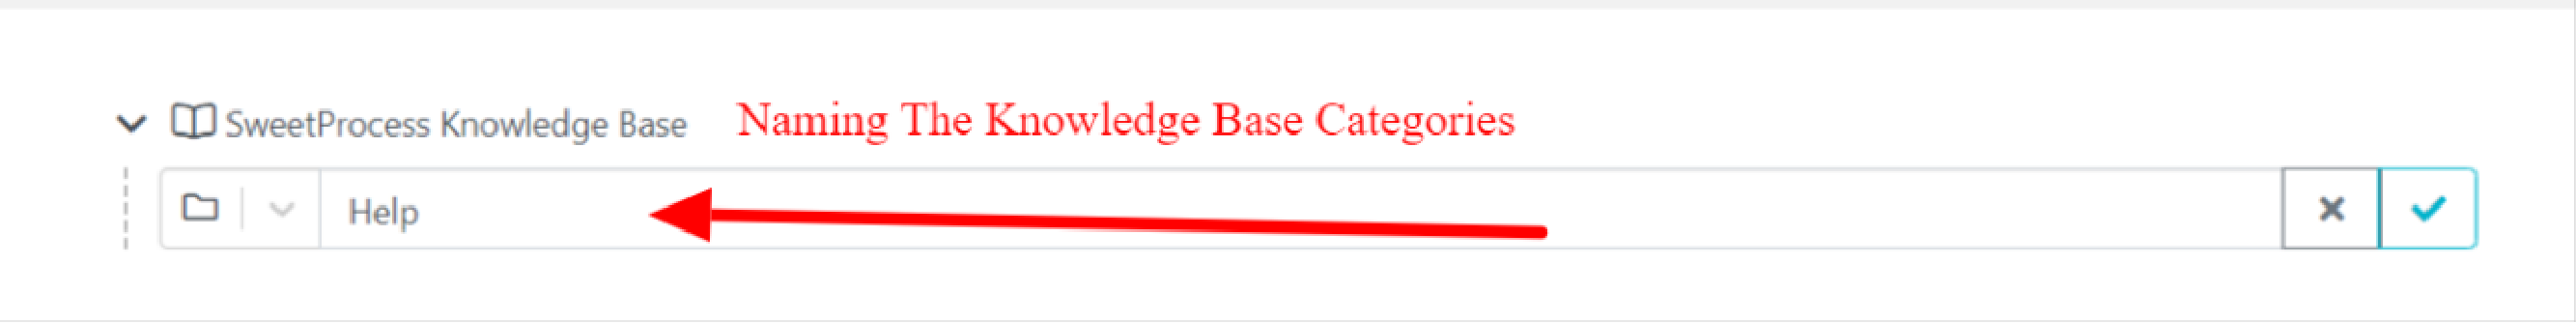 Naming The Knowledge Base Categories